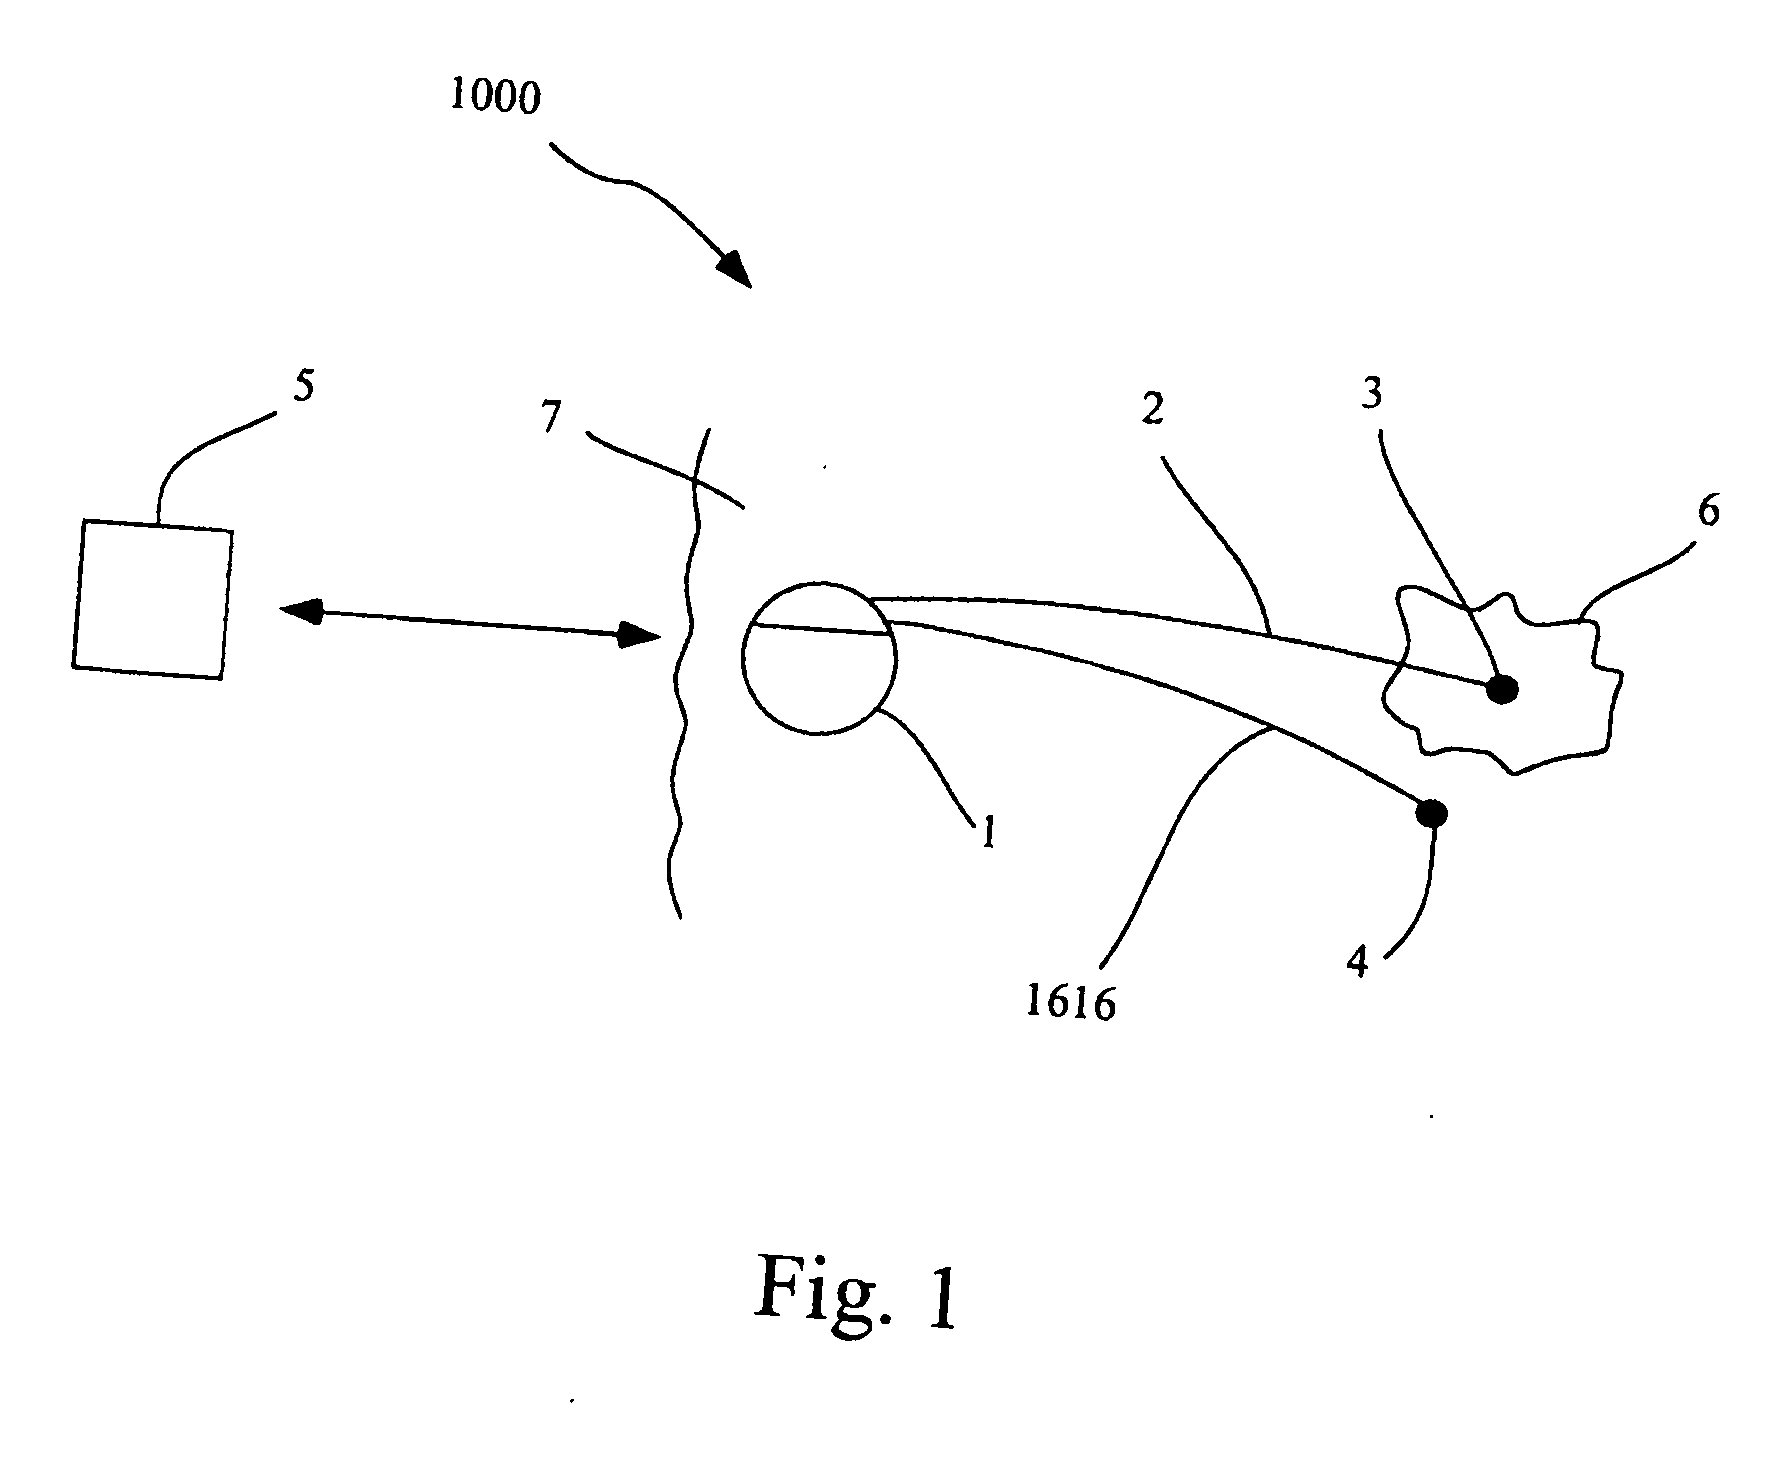 Method and Device for Treating Abnormal Tissue Growth With Electrical Therapy